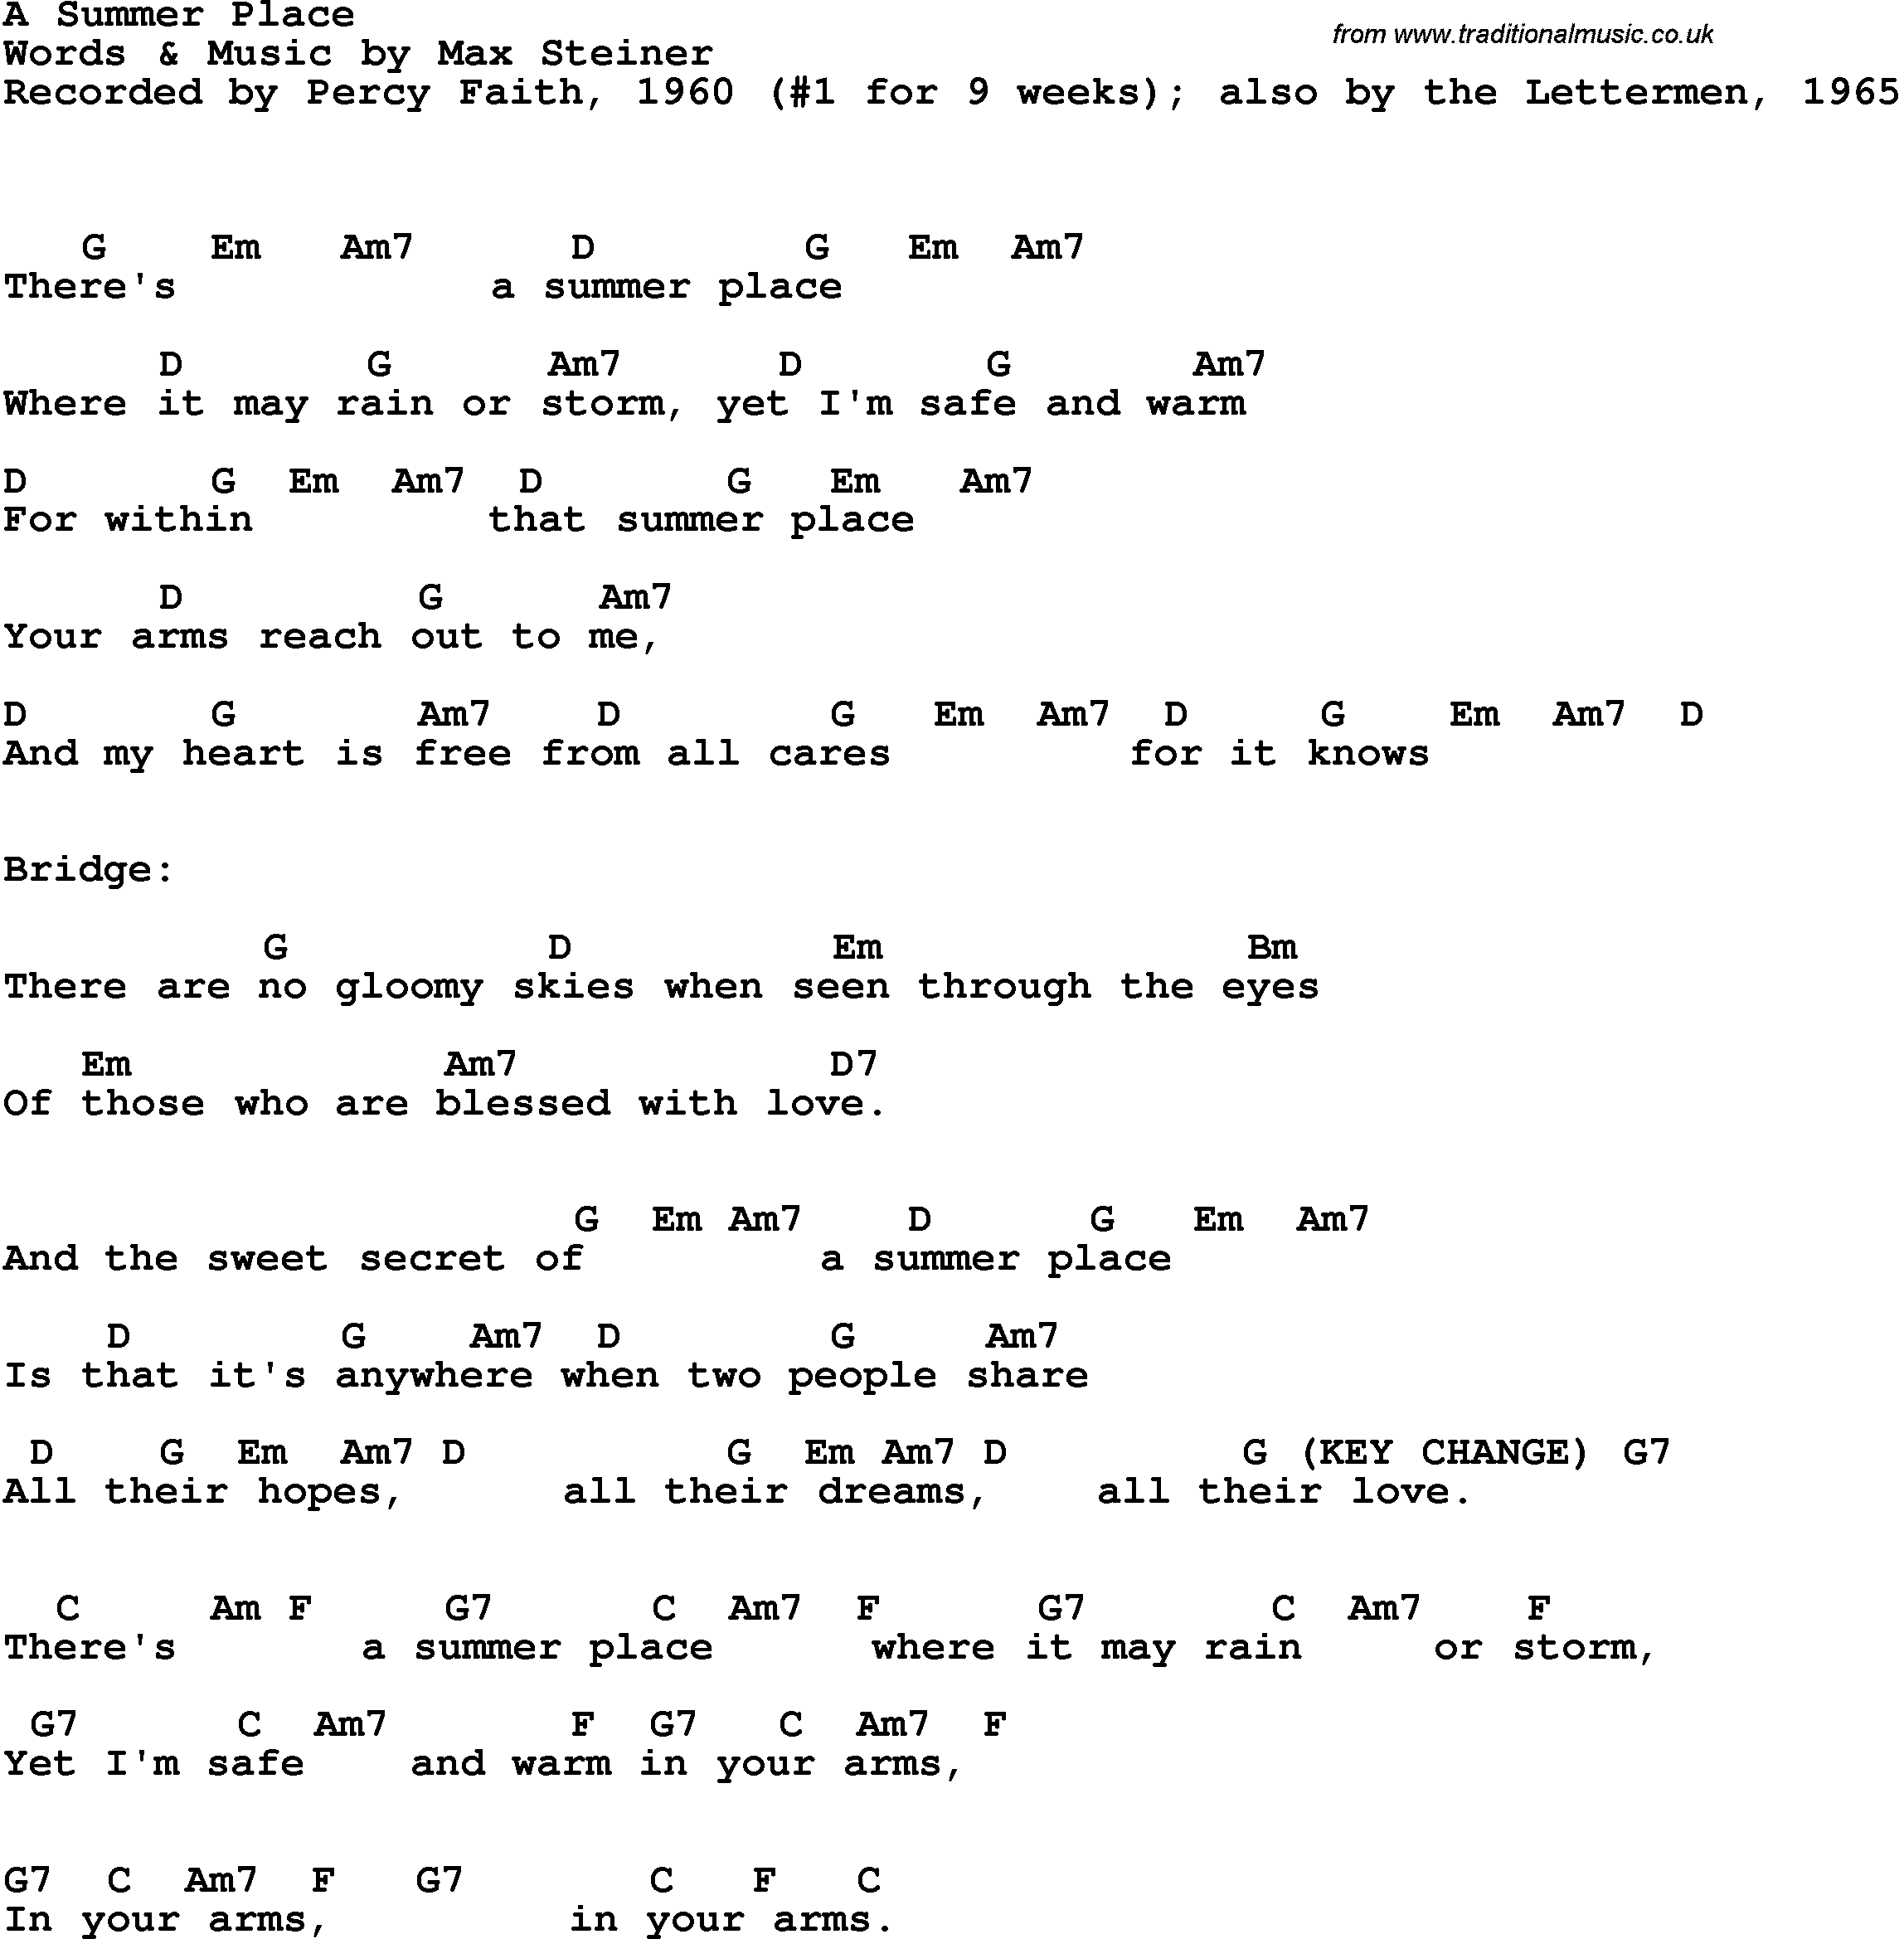 Song Lyrics with guitar chords for A Summer Place - The Lettermen, 1965